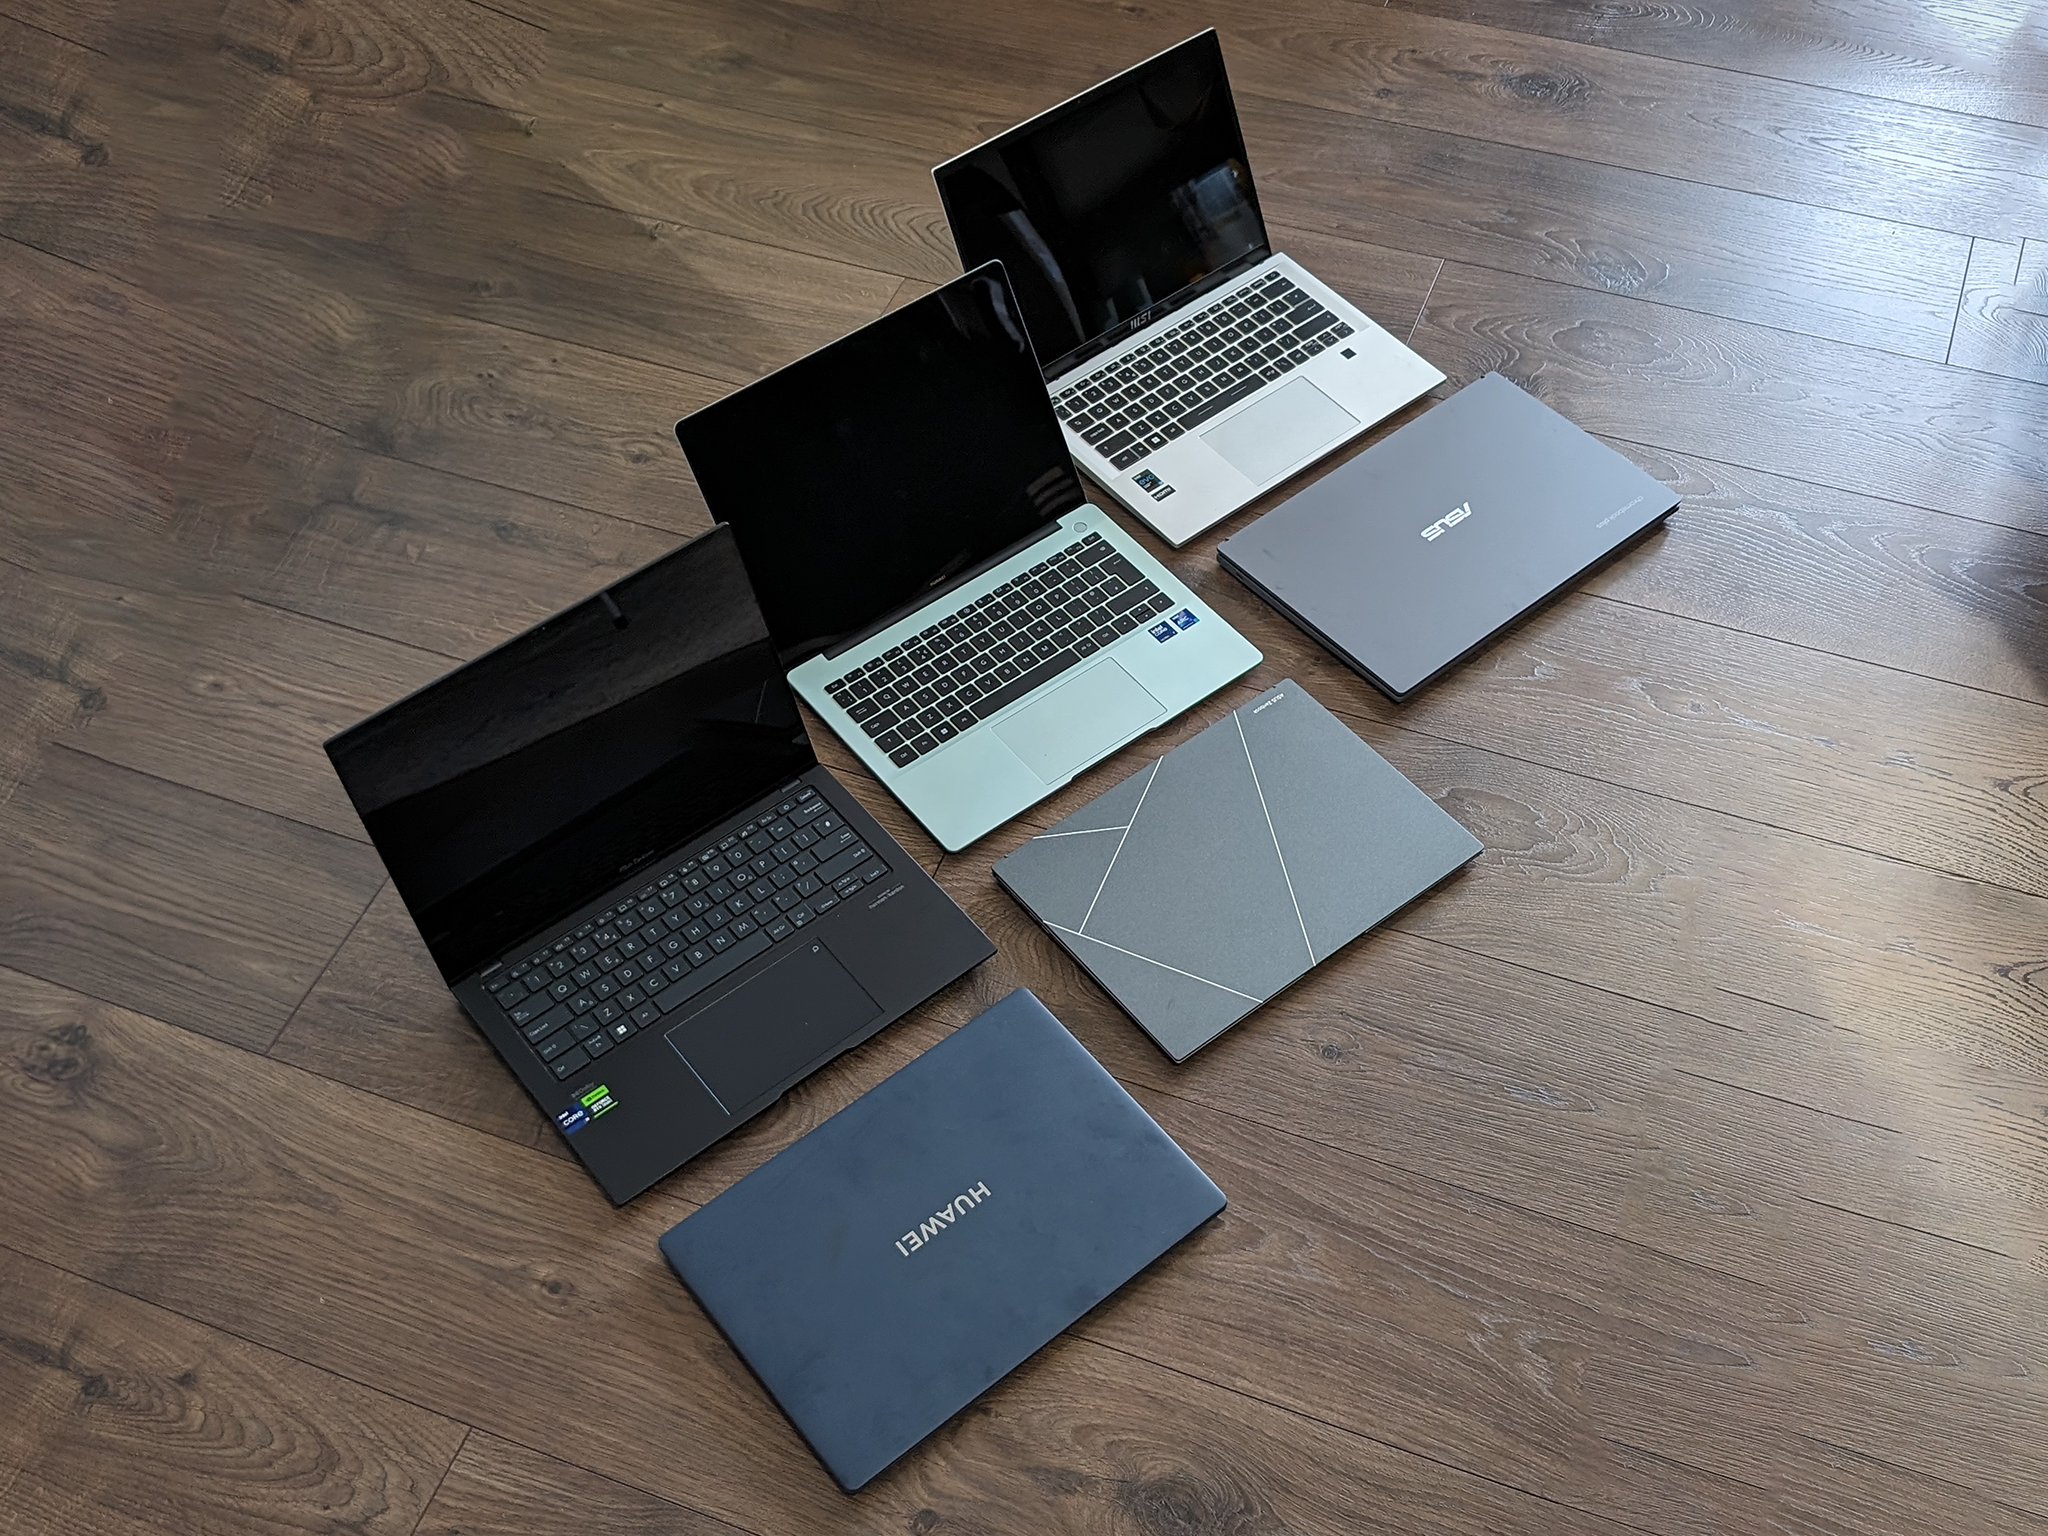 We put a range of laptops for all budgets through their paces